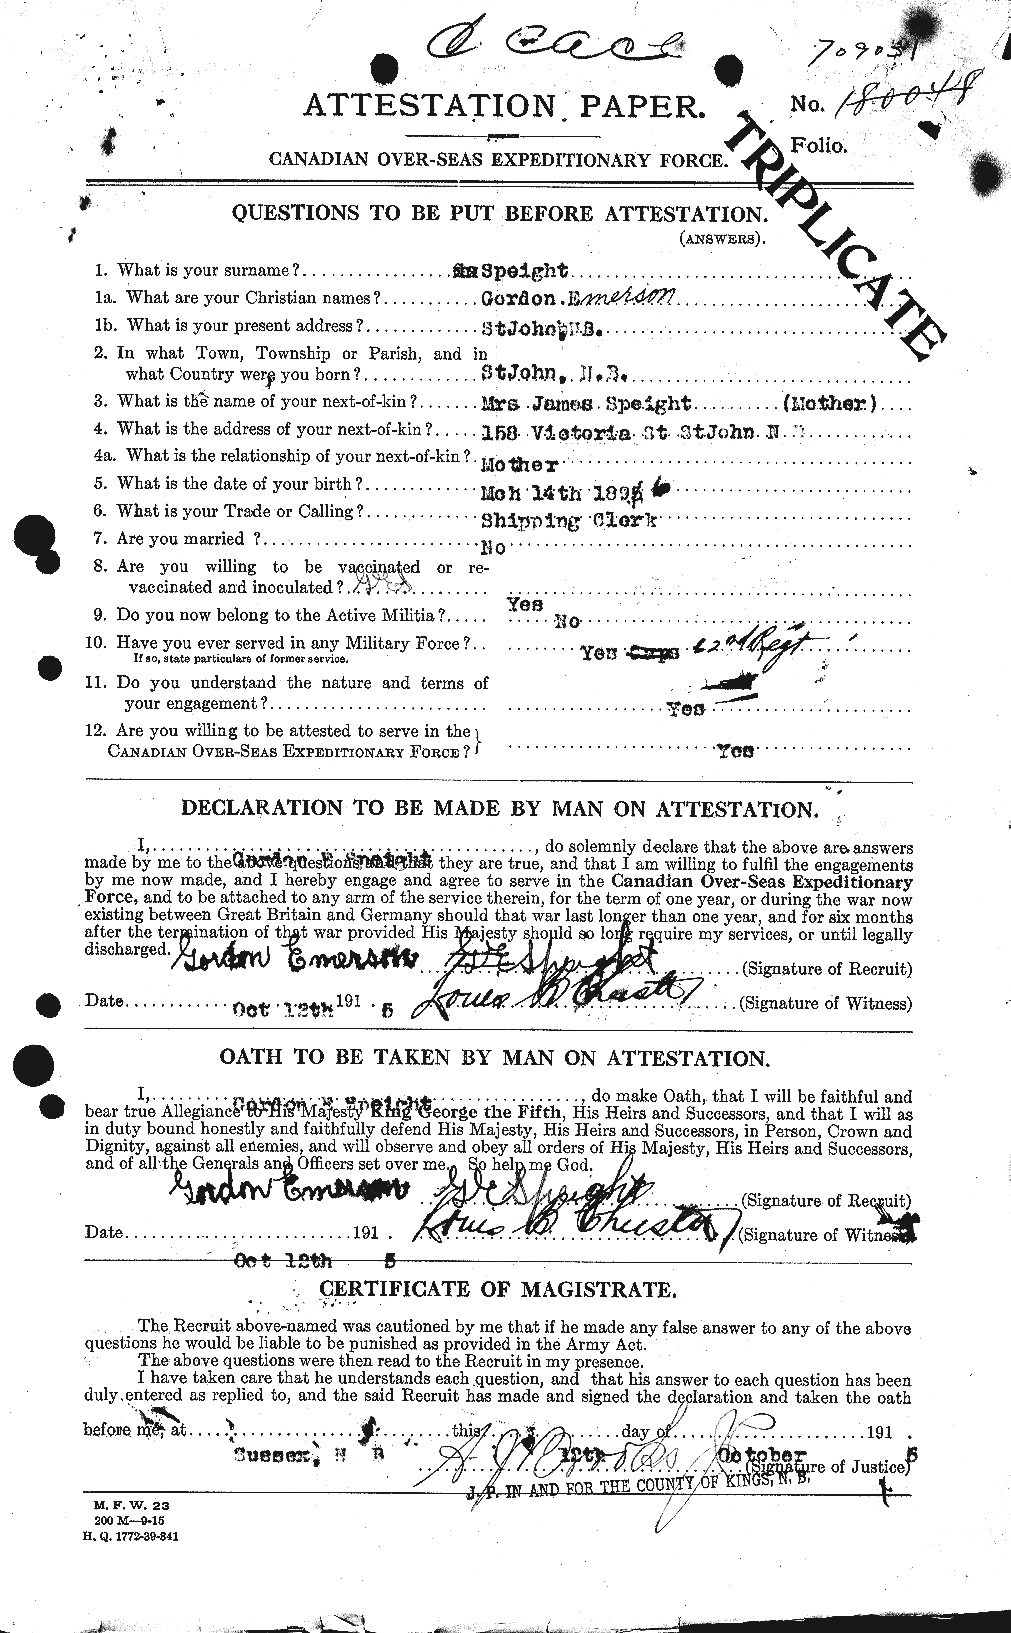 Personnel Records of the First World War - CEF 110074a